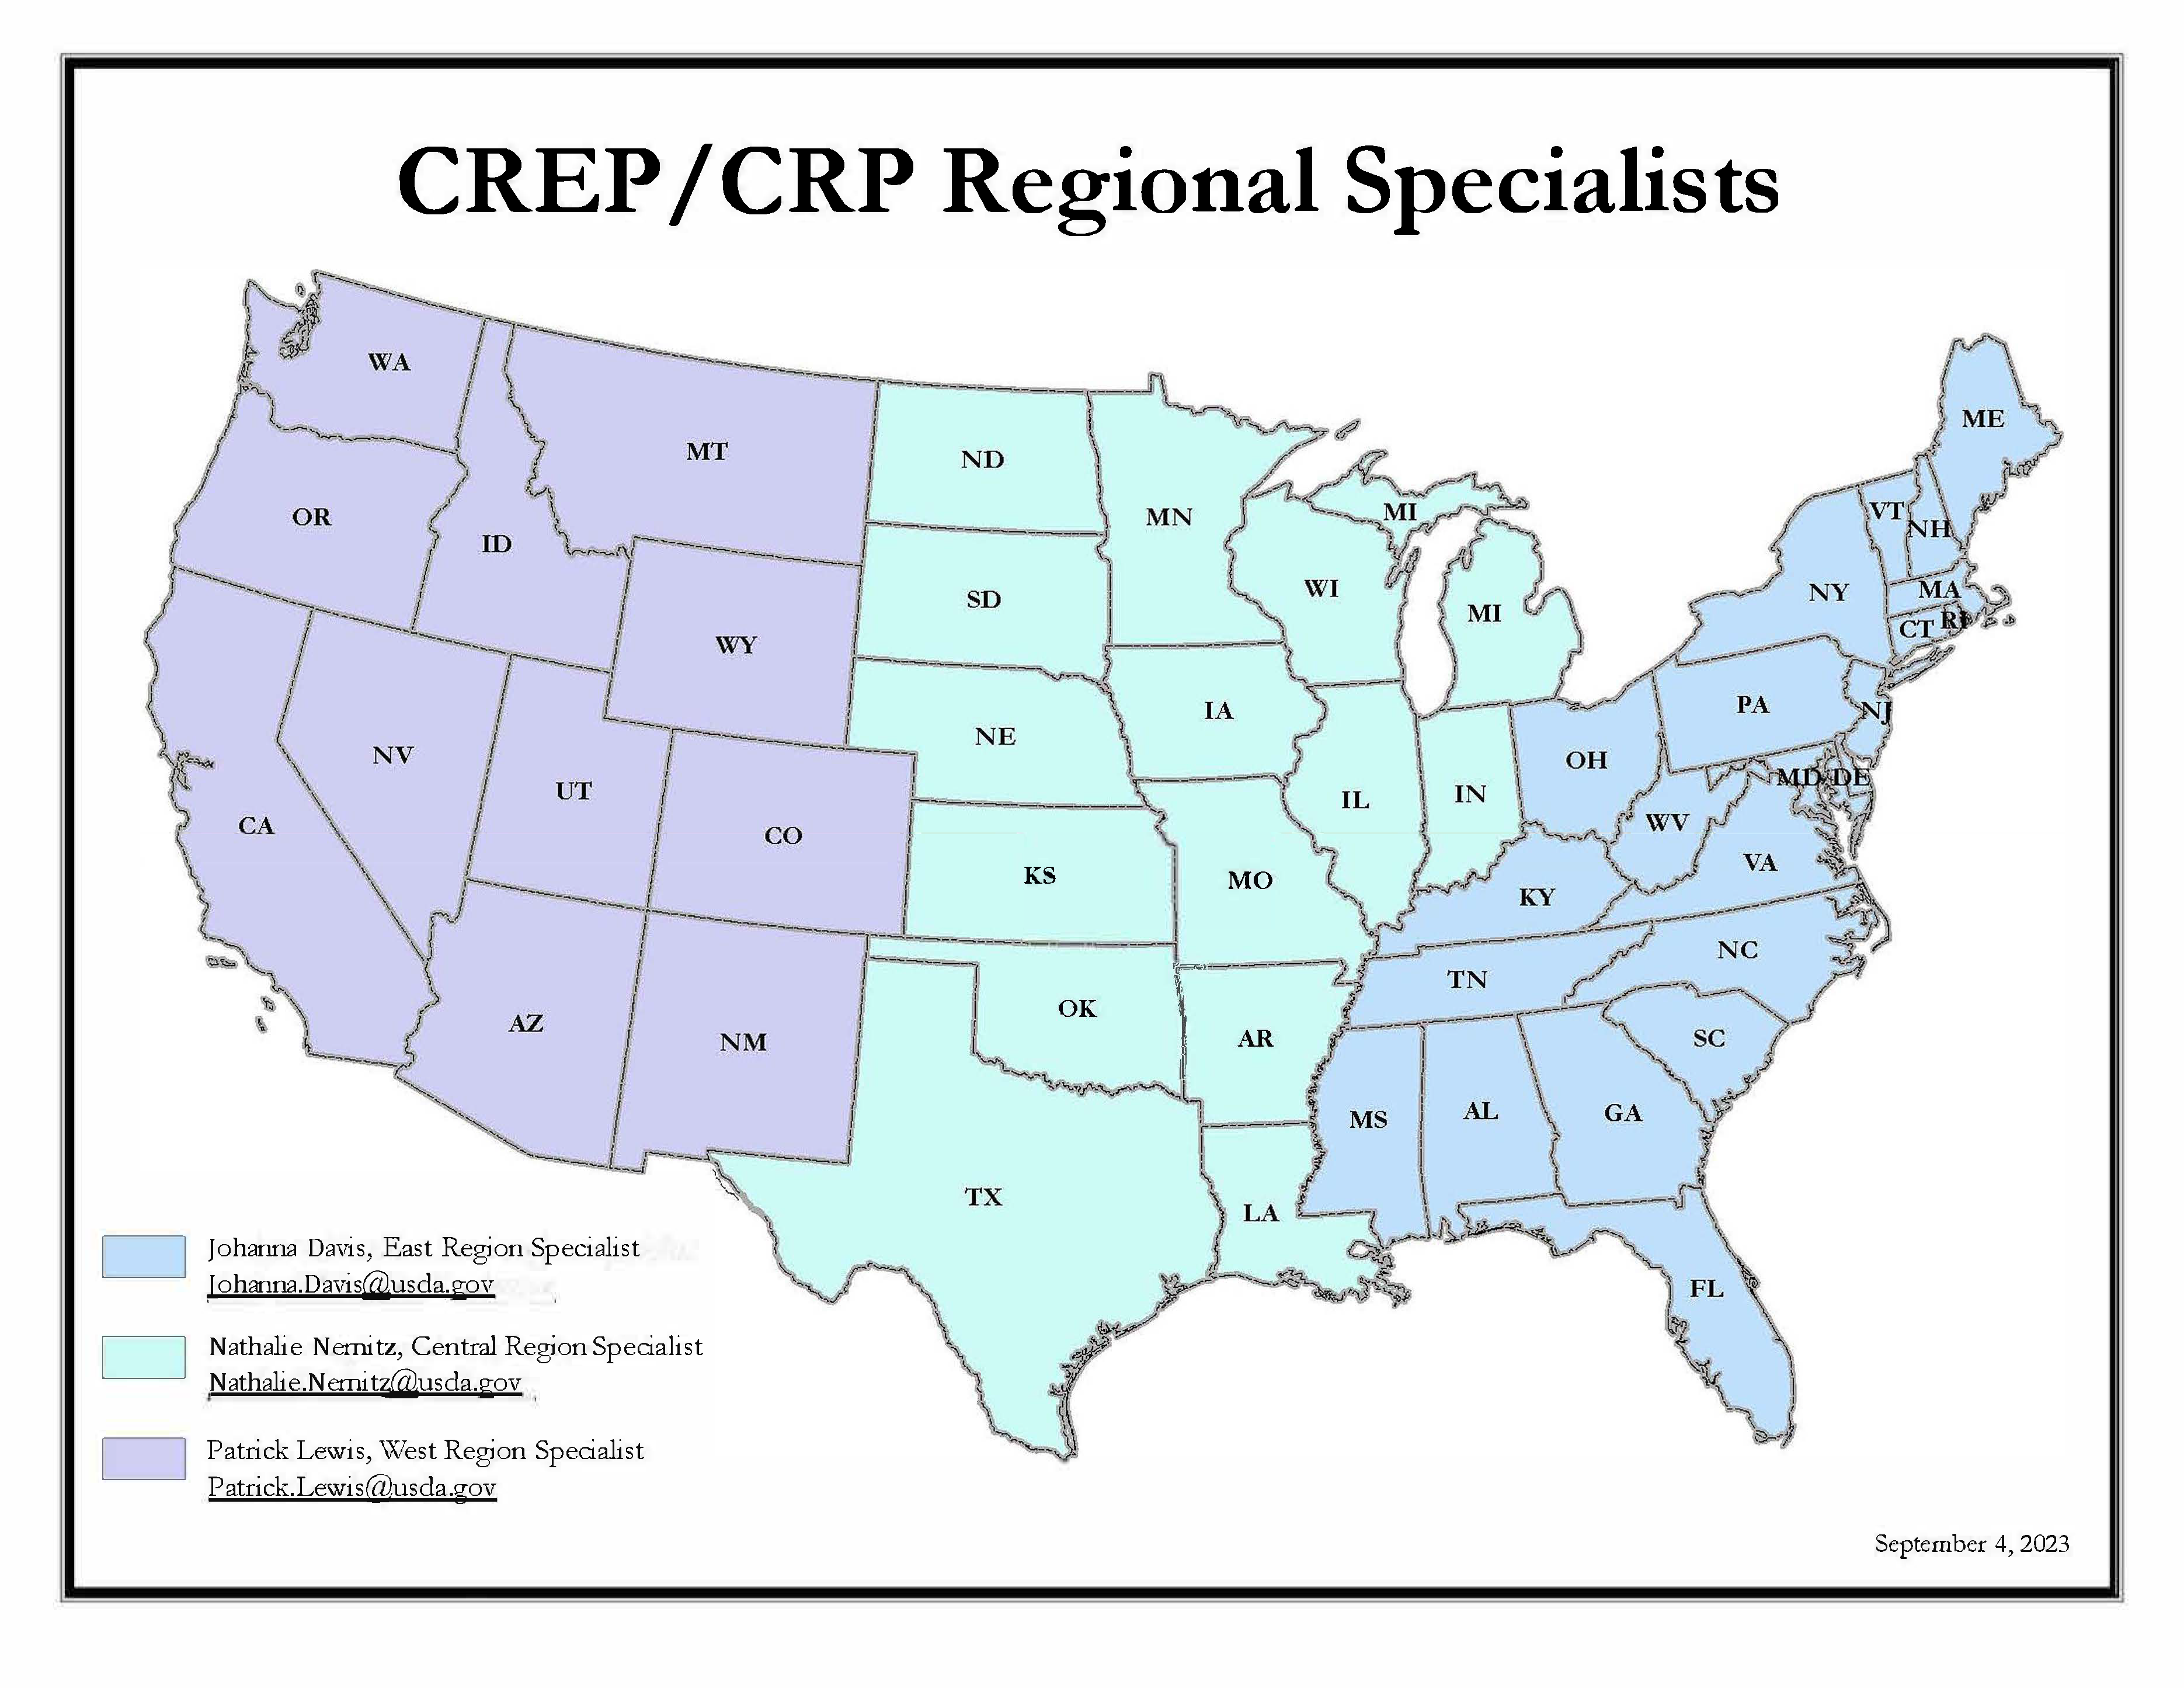 crep_regions_map_with_contact_information_9_4_23